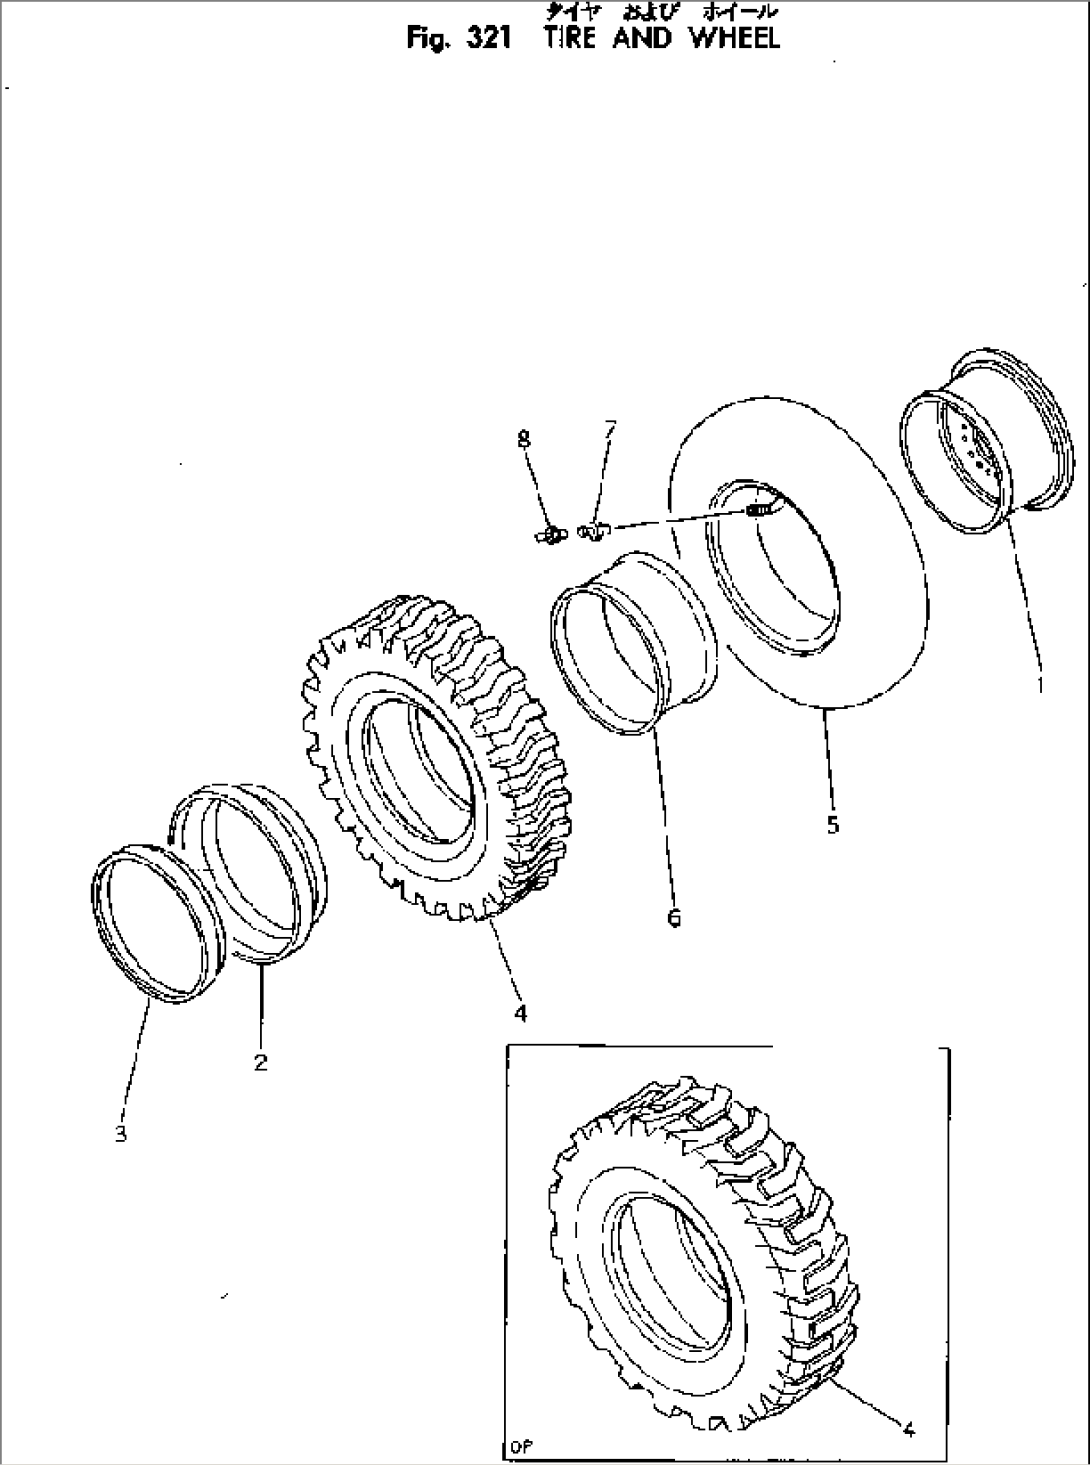 TIRE AND WHEEL